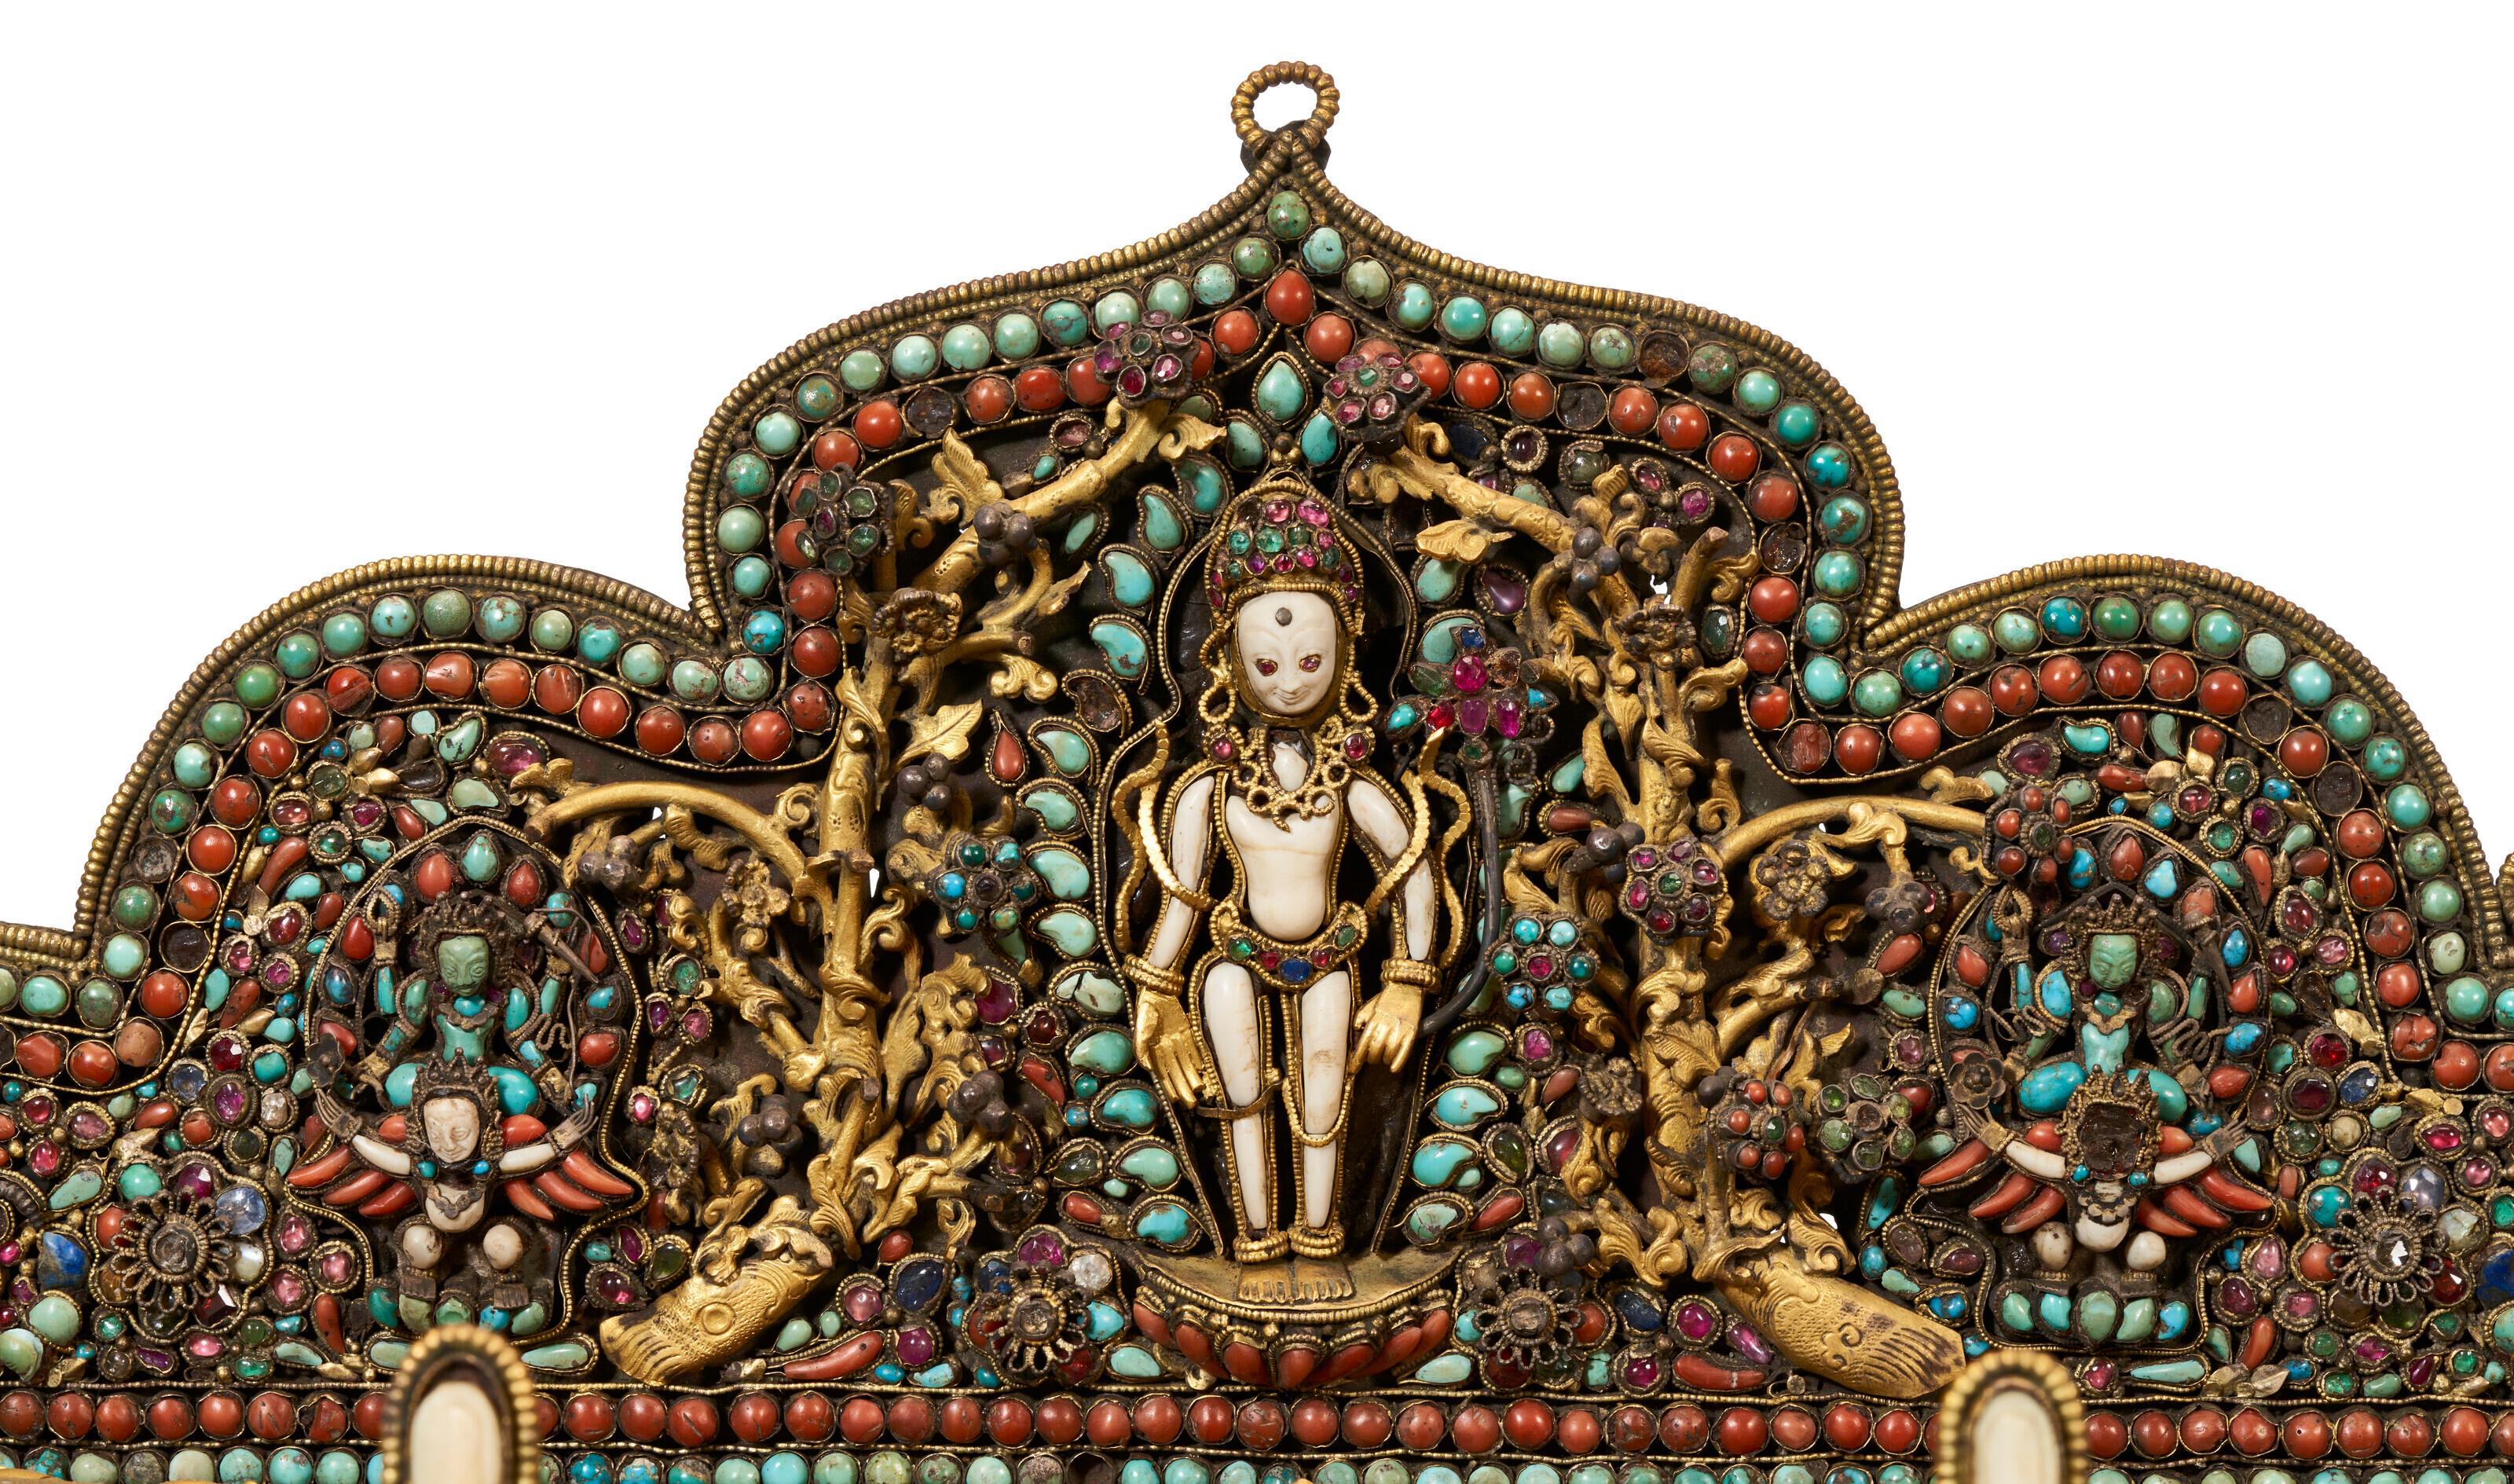 18th/19th Century Nepalese Inlaid and Gilt Silver and Copper Altar For Sale 2